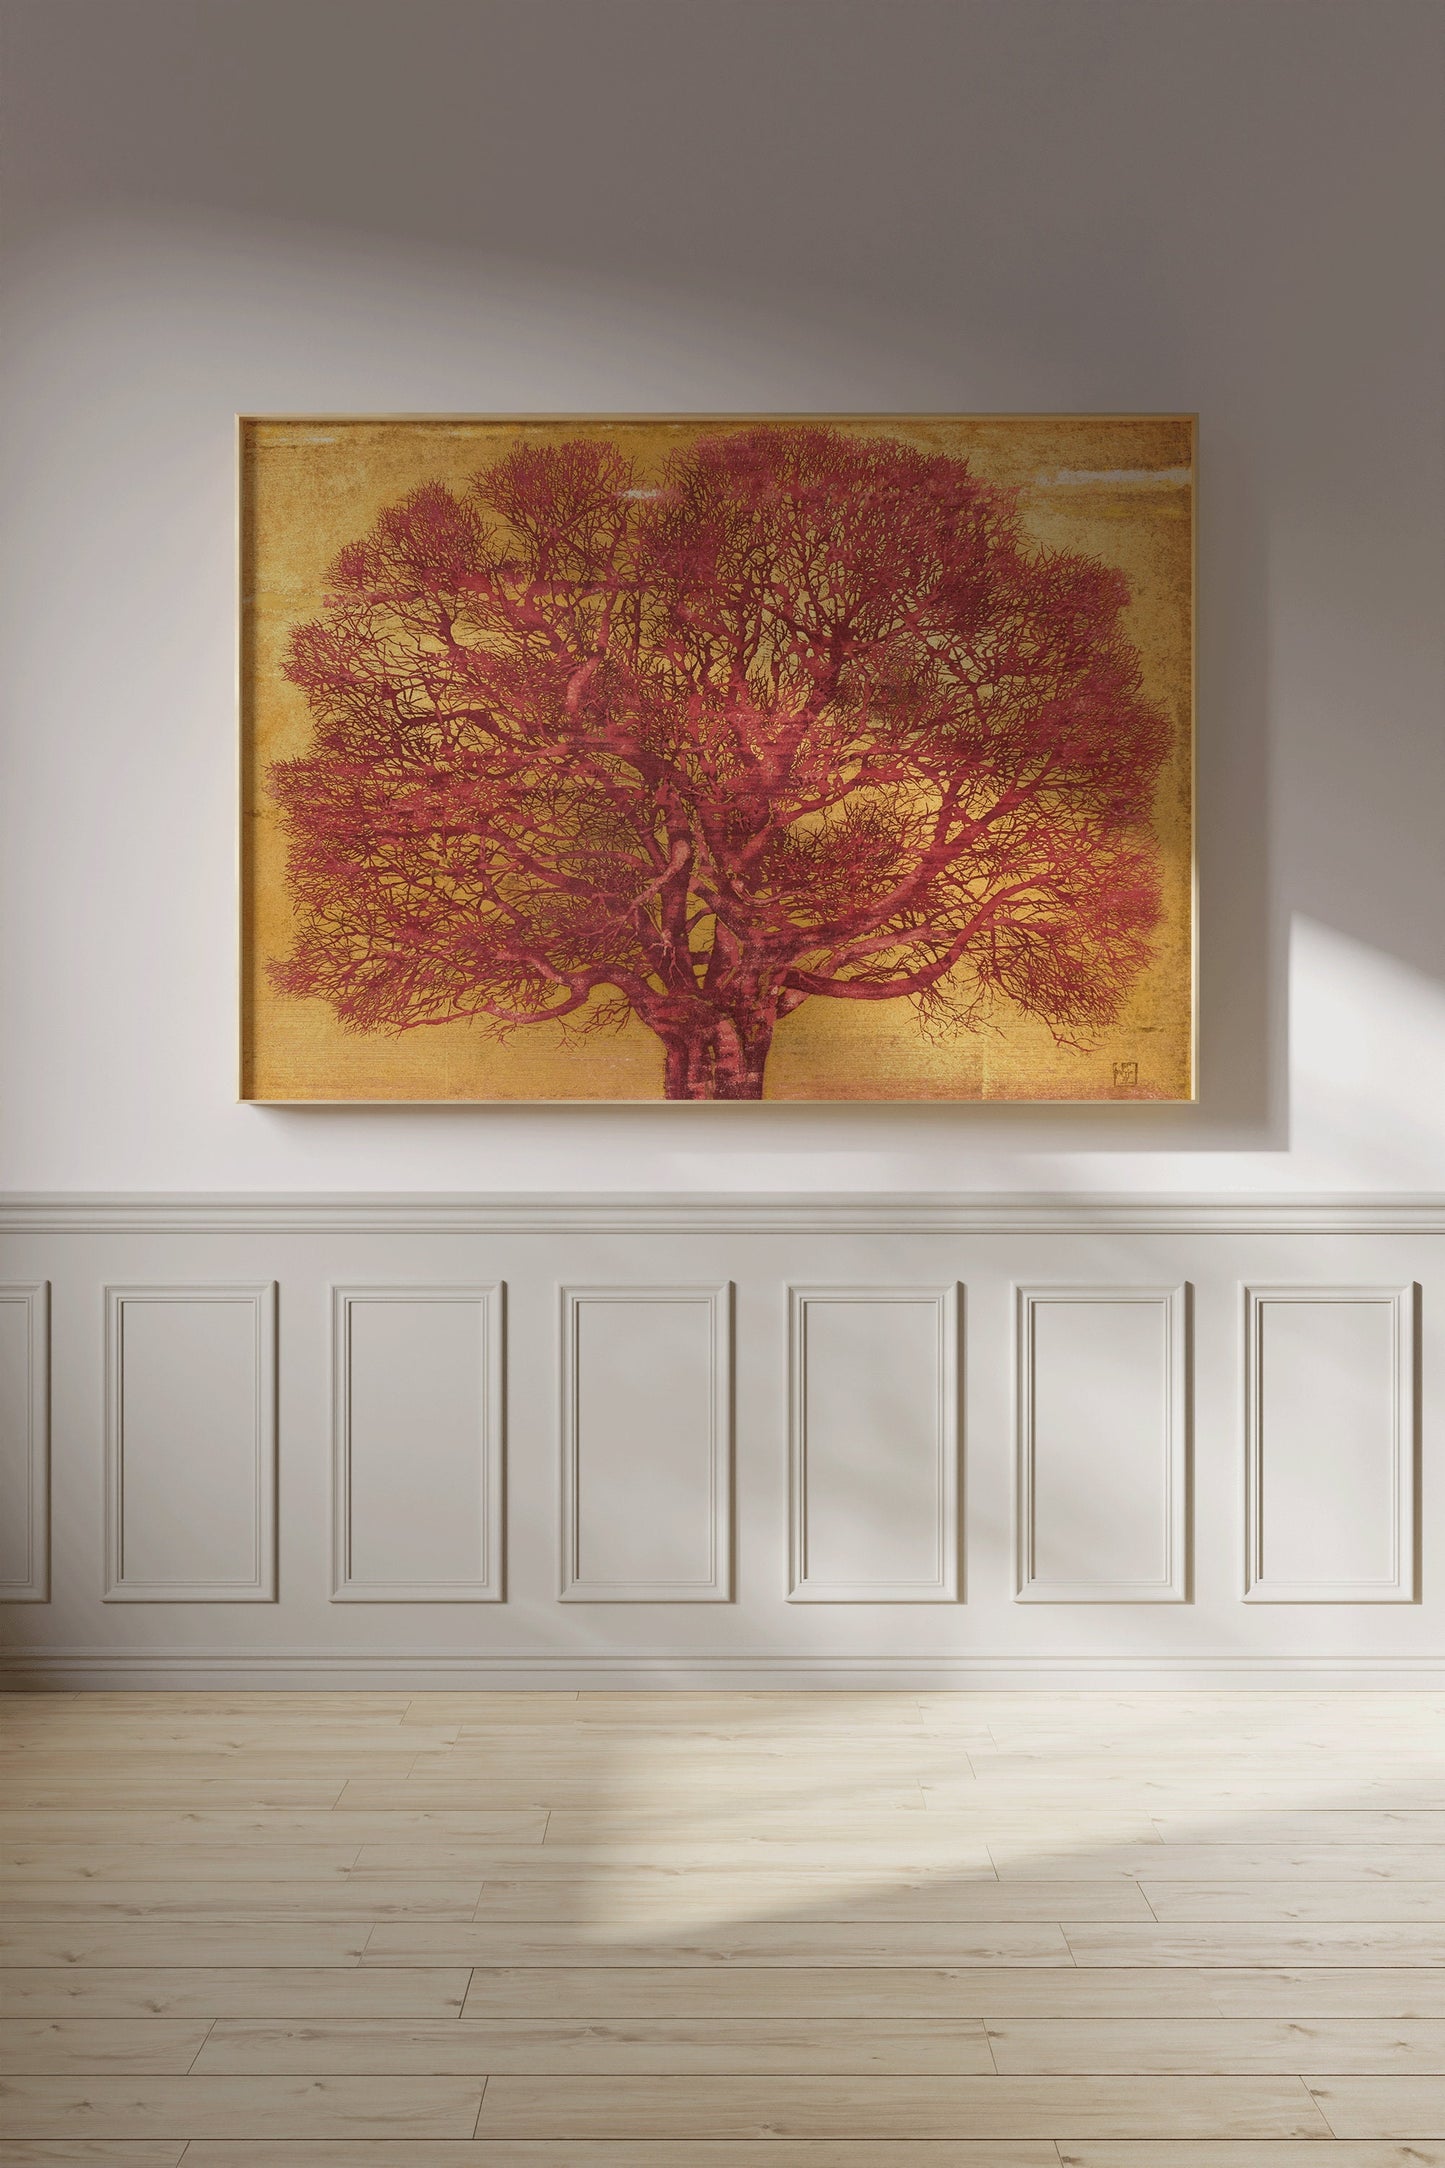 Joichi Hoshi - Red Tree | Vintage Japanese Woodblock Art in Red and Gold (available framed or unframed)